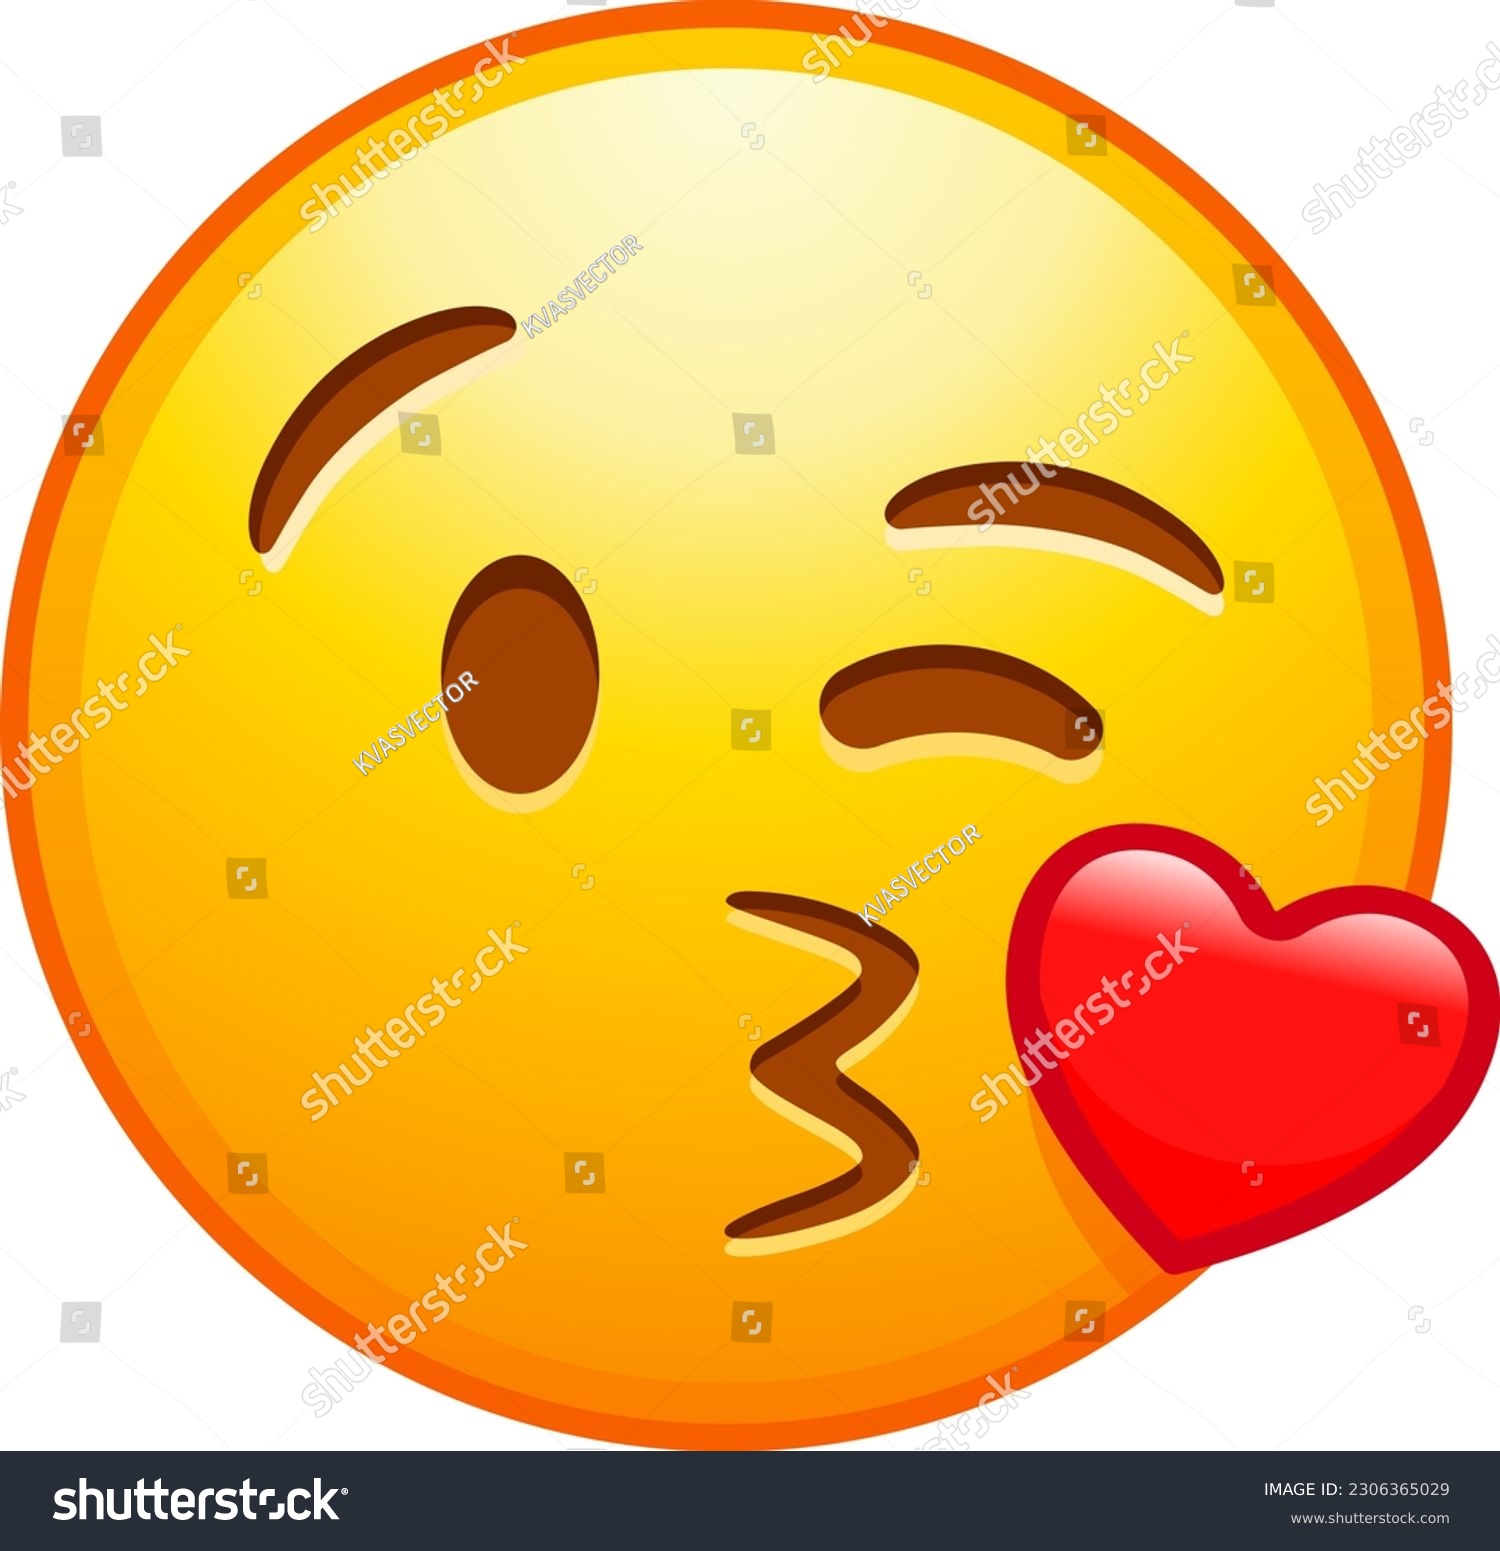 SVG of Top quality emoticon. Kiss emoji. Love emoticon with lips blowing a kiss, winking yellow face with red. Yellow face emoji. Popular element. WhatsApp. iOS. Emoji from Telegram app. twitter svg